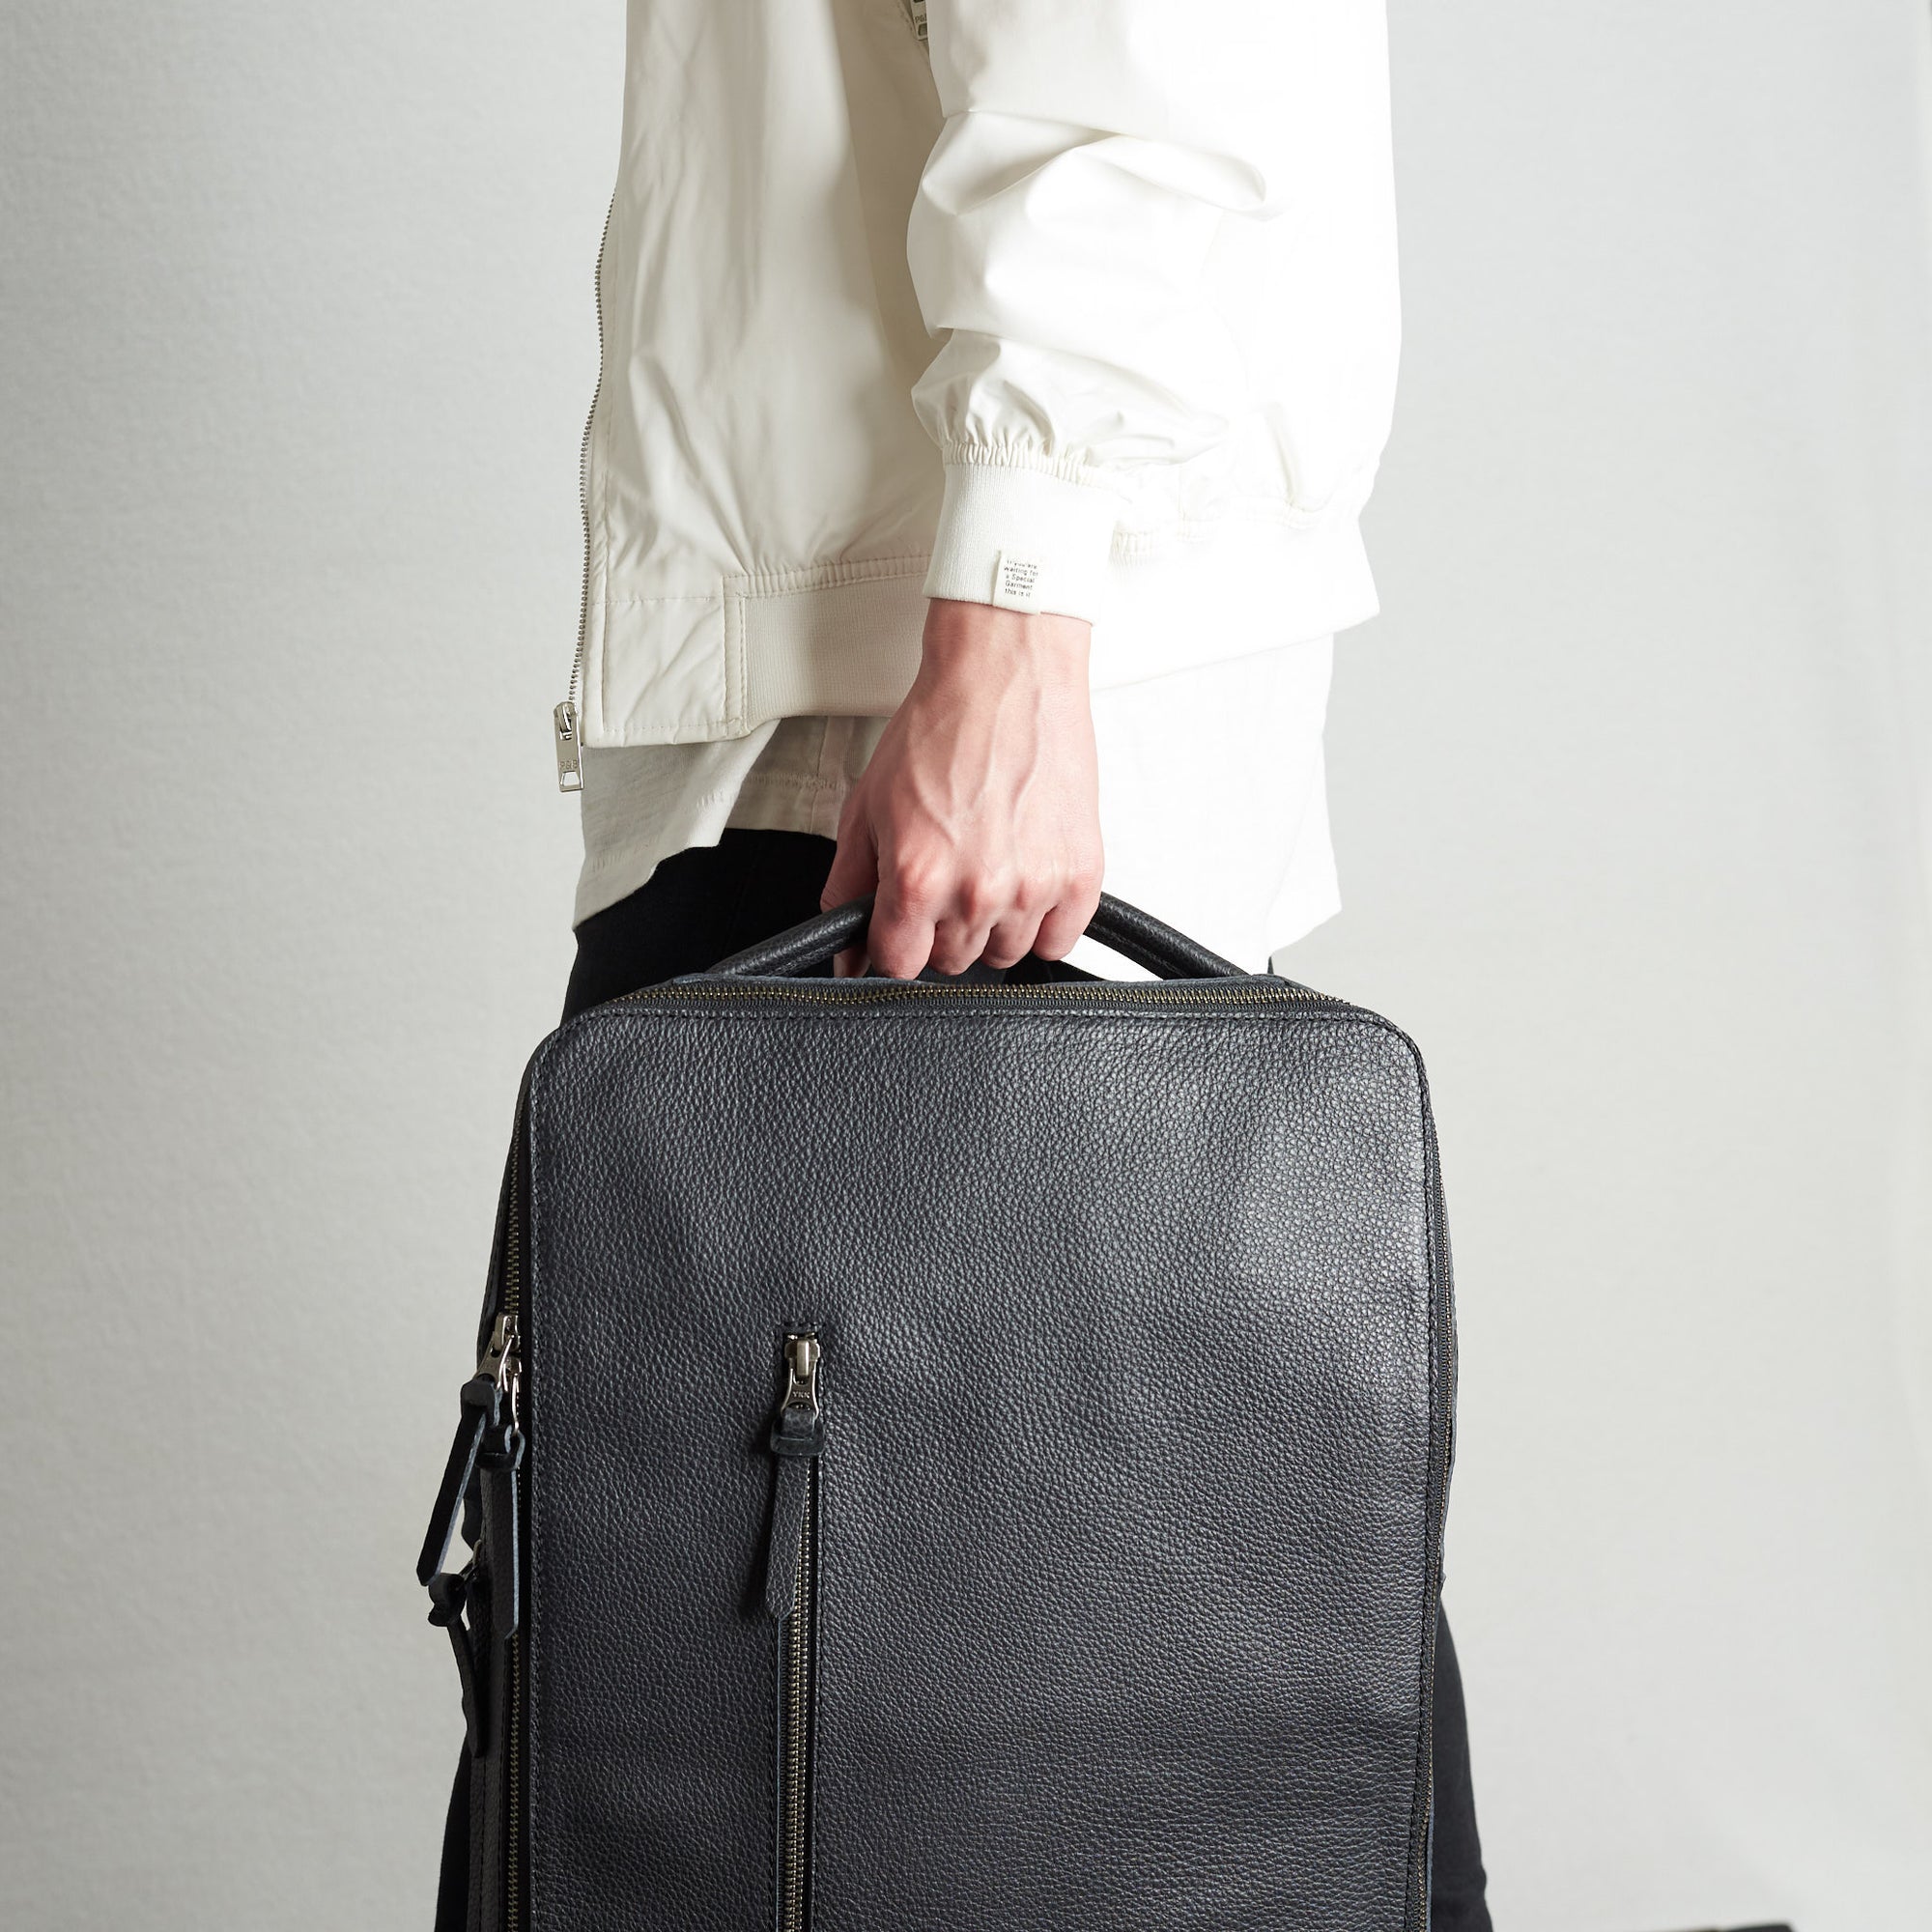 professional backpacks black by capra leather